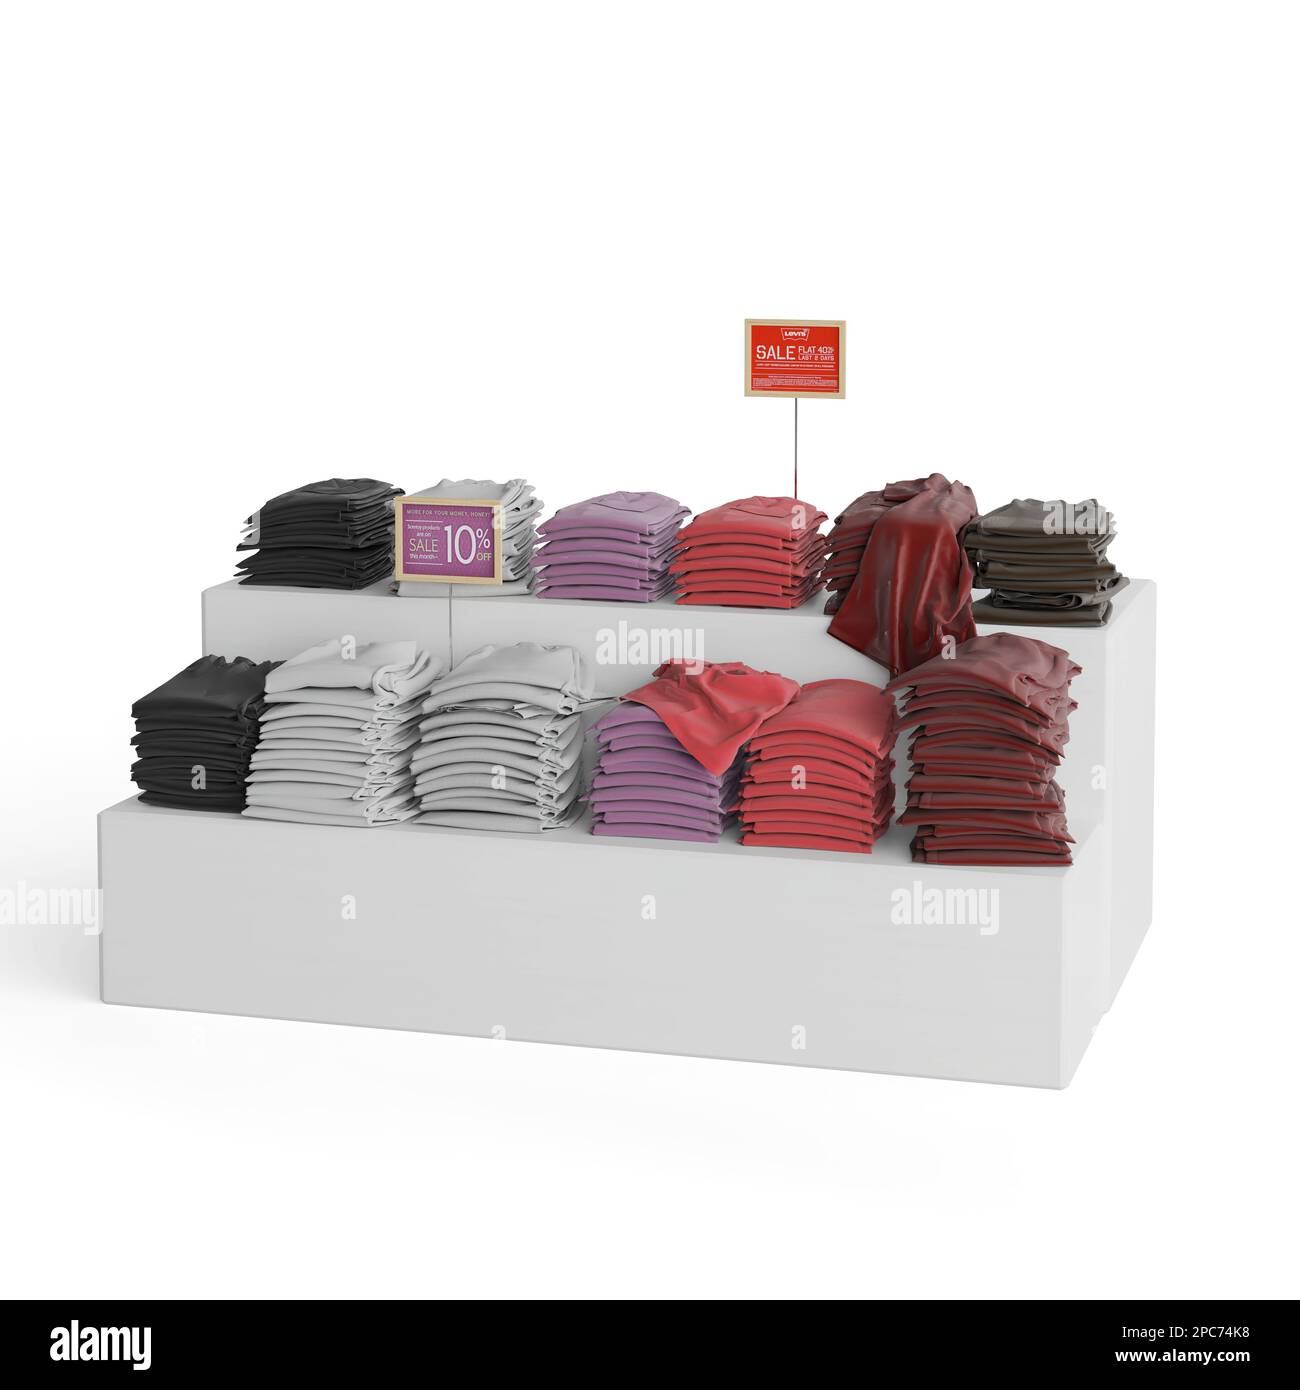 3D render of store display case with clothing & price sign Stock Photo